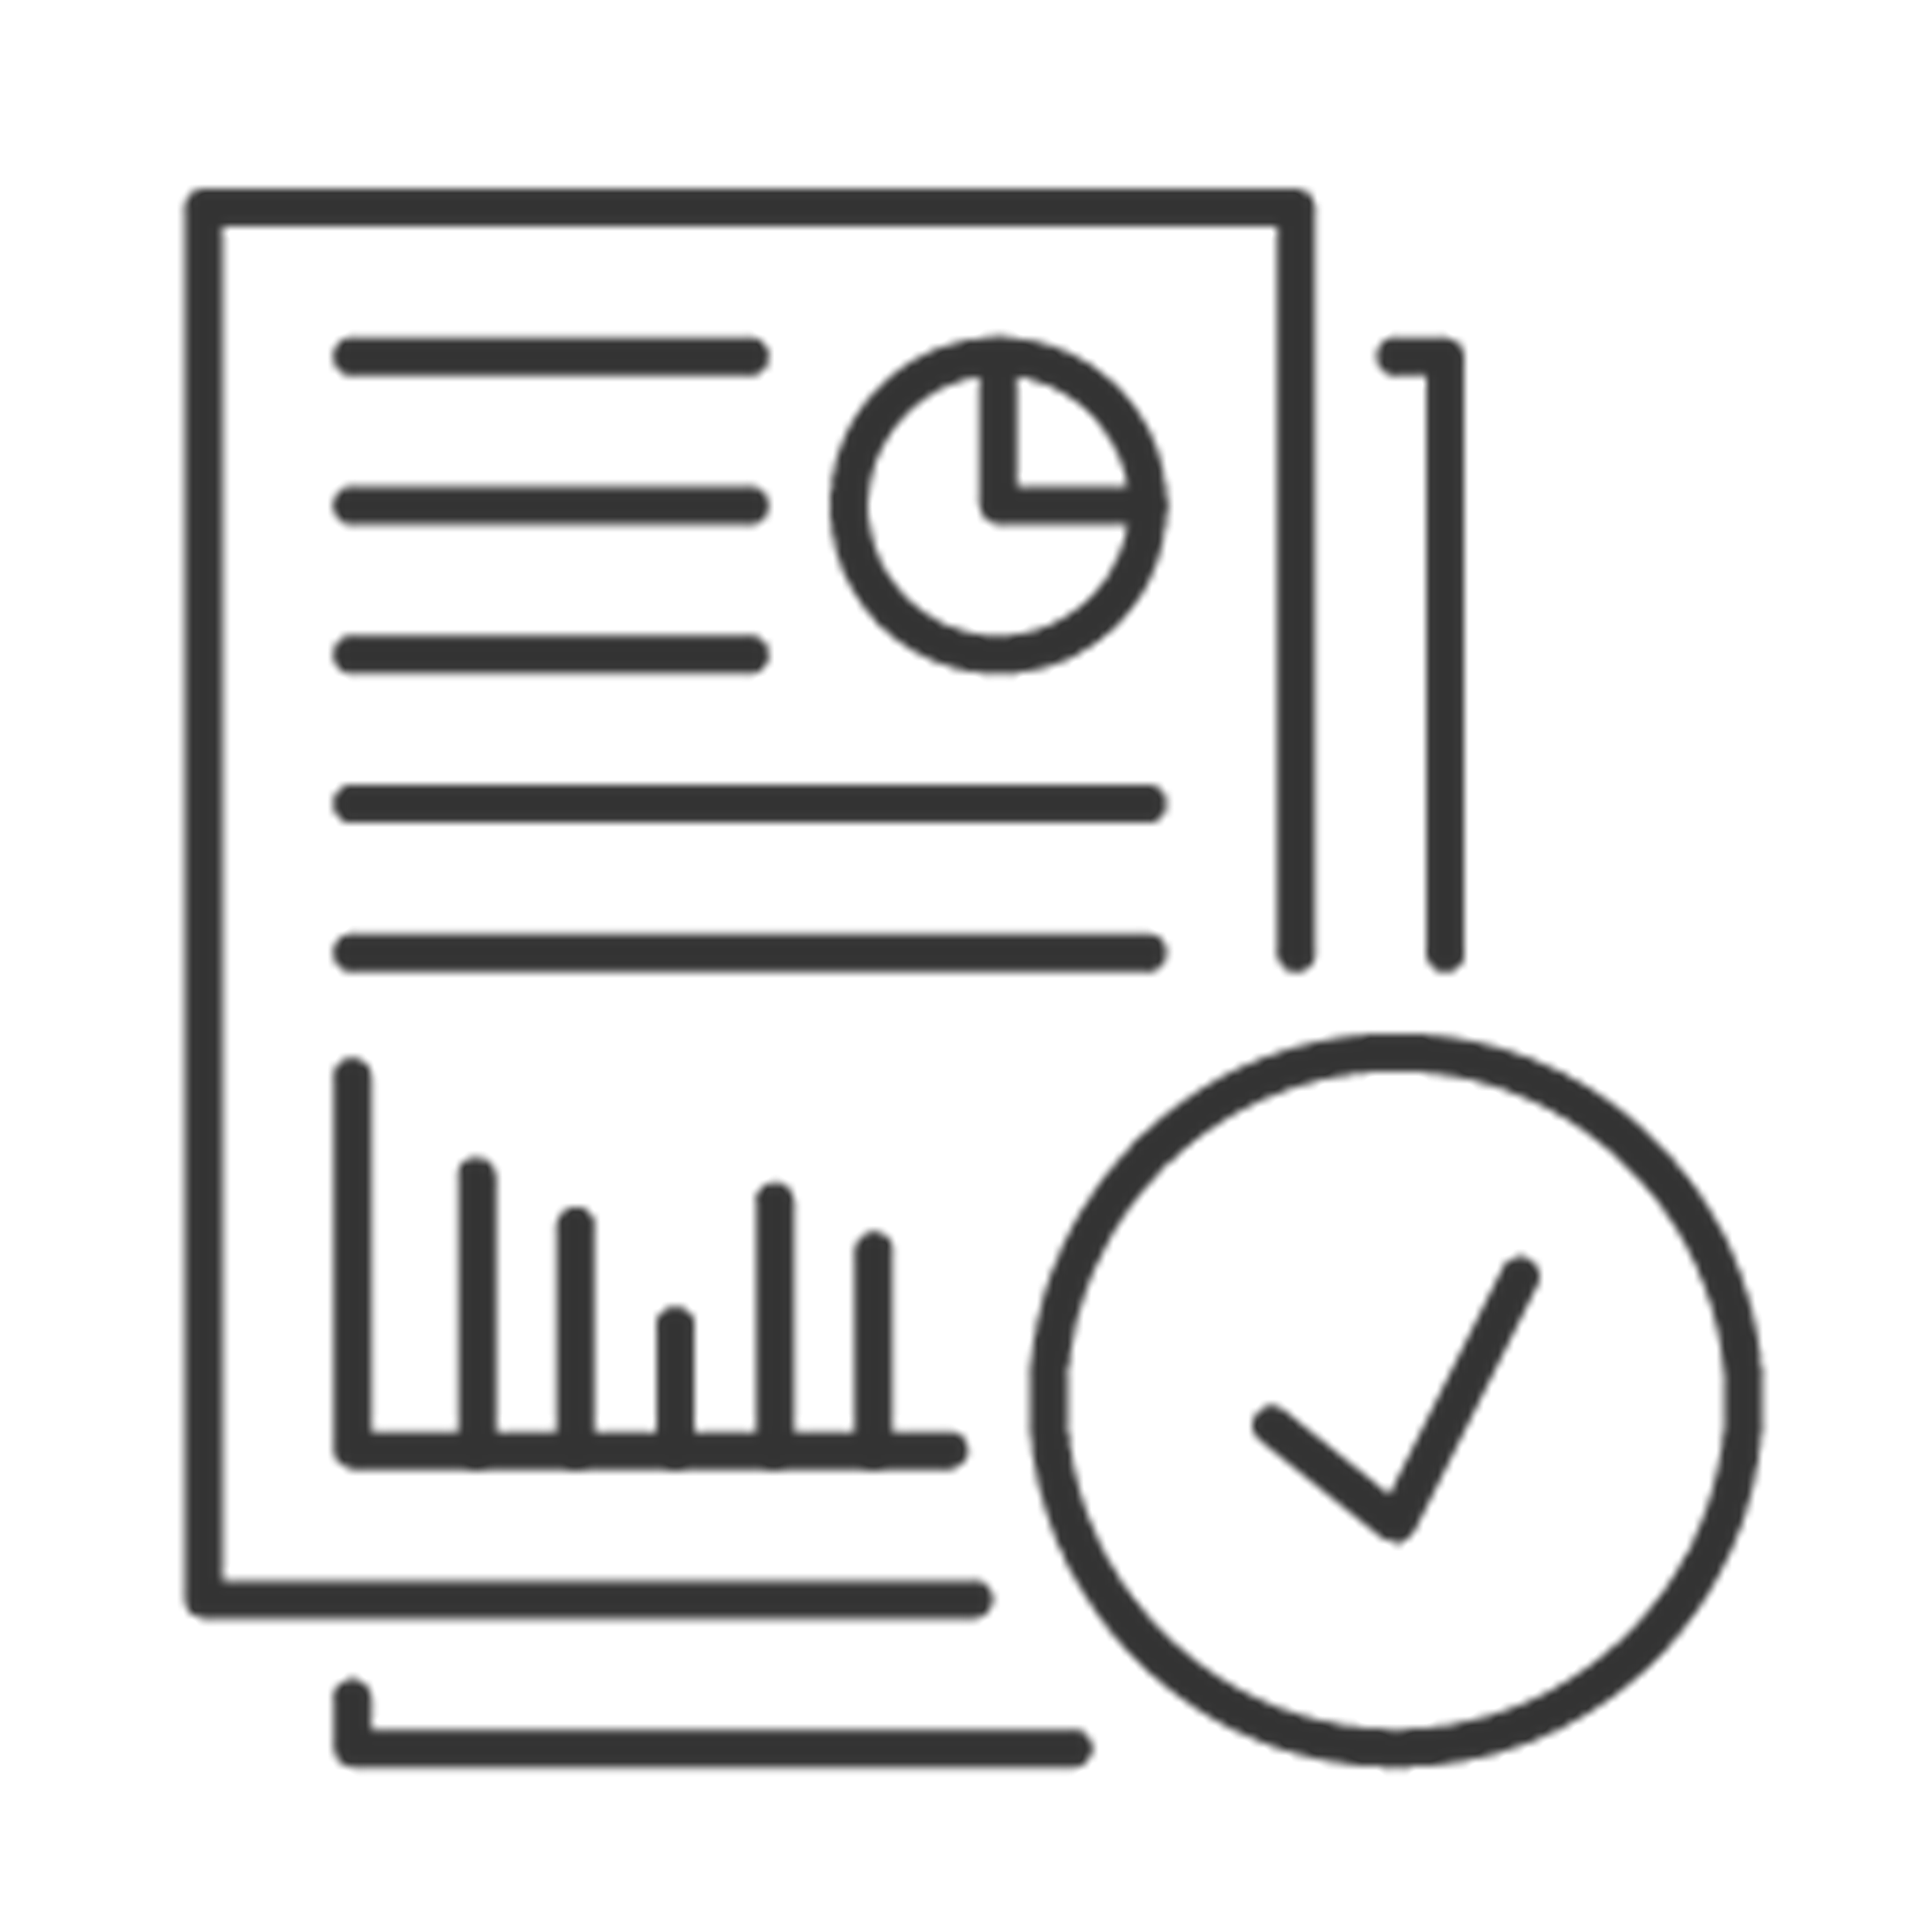 Icon of a document with charts and graphics